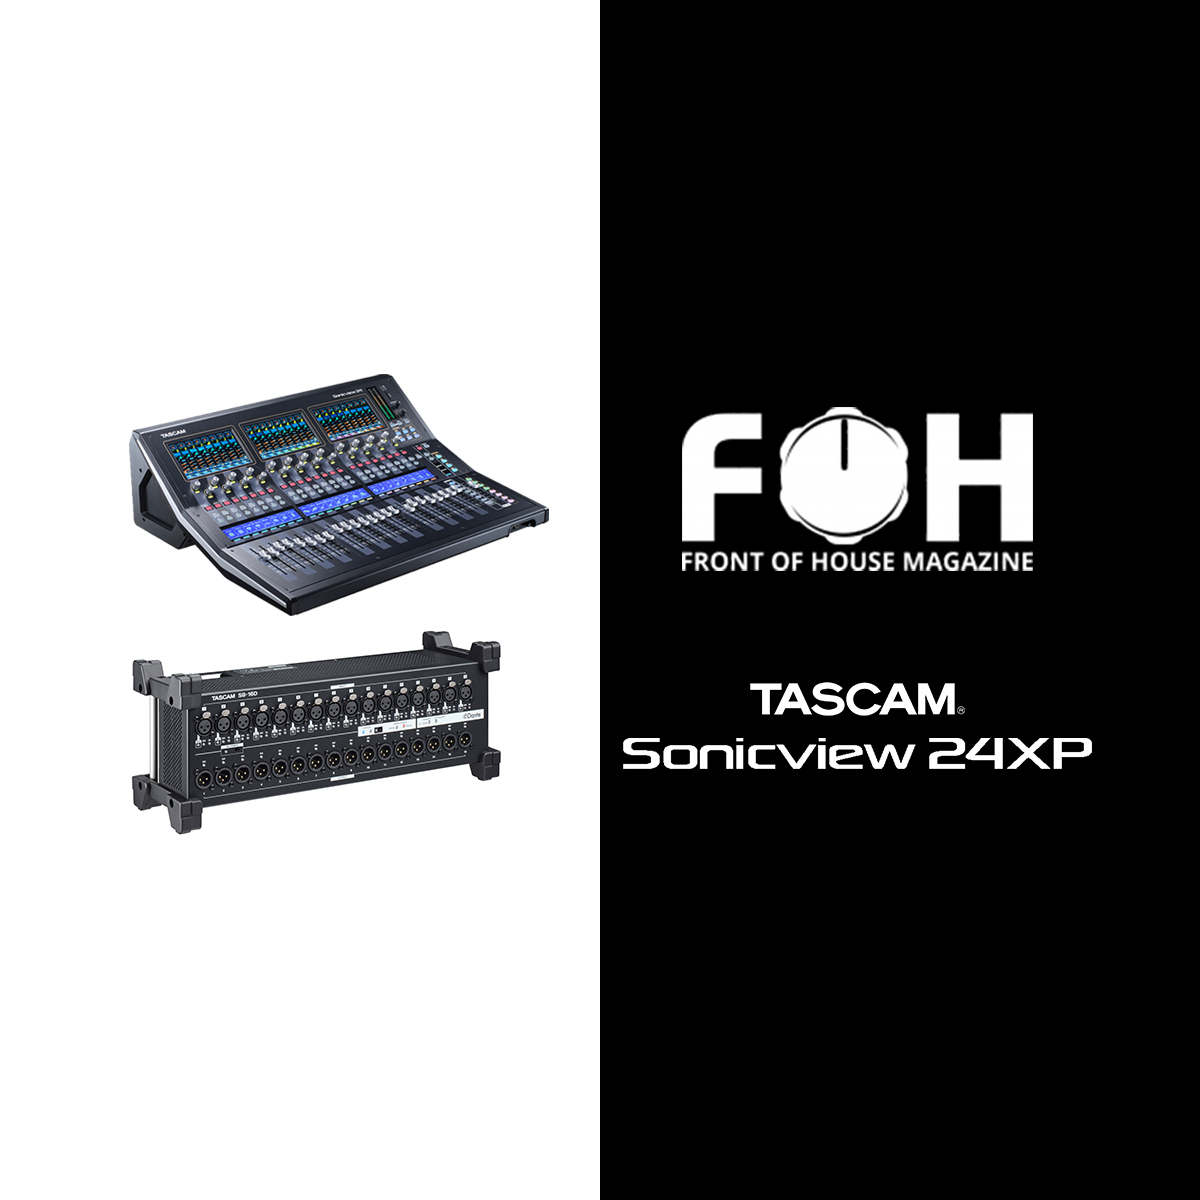 TASCAM Sonicview 24XP Digital Console Read Test by FOH